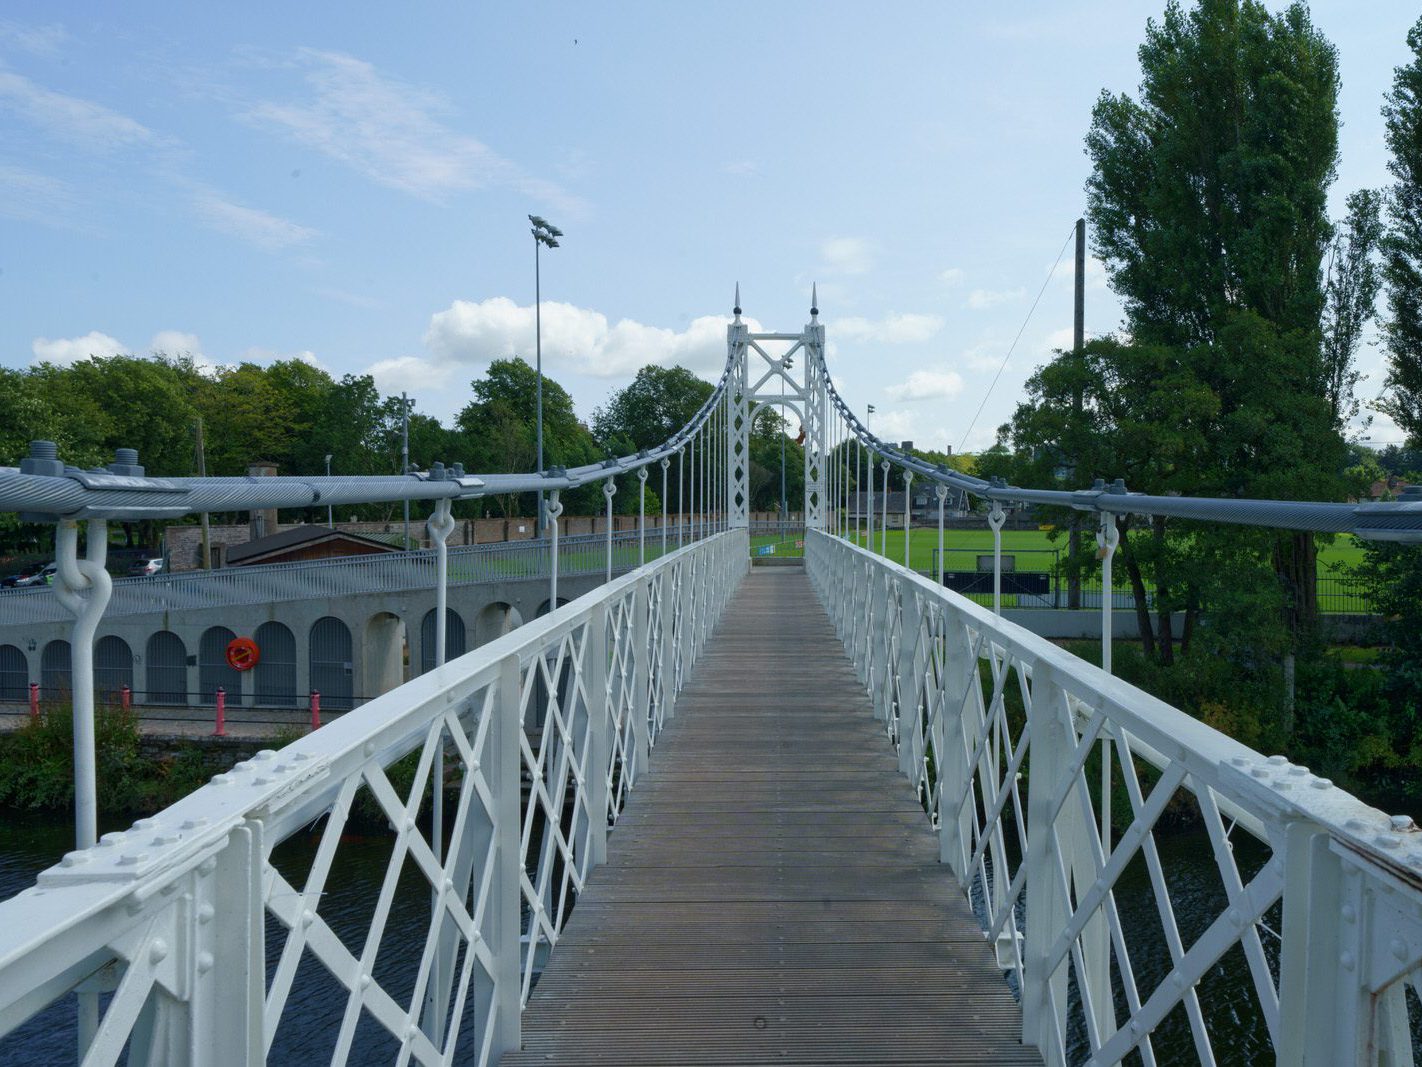 THE REPAIRED AND RESTORED SHAKEY BRIDGE ACROSS THE RIVER LEE [THERE IS A LITTLE TEDDY BEAR IN SOME OF THE IMAGES]-224555-1